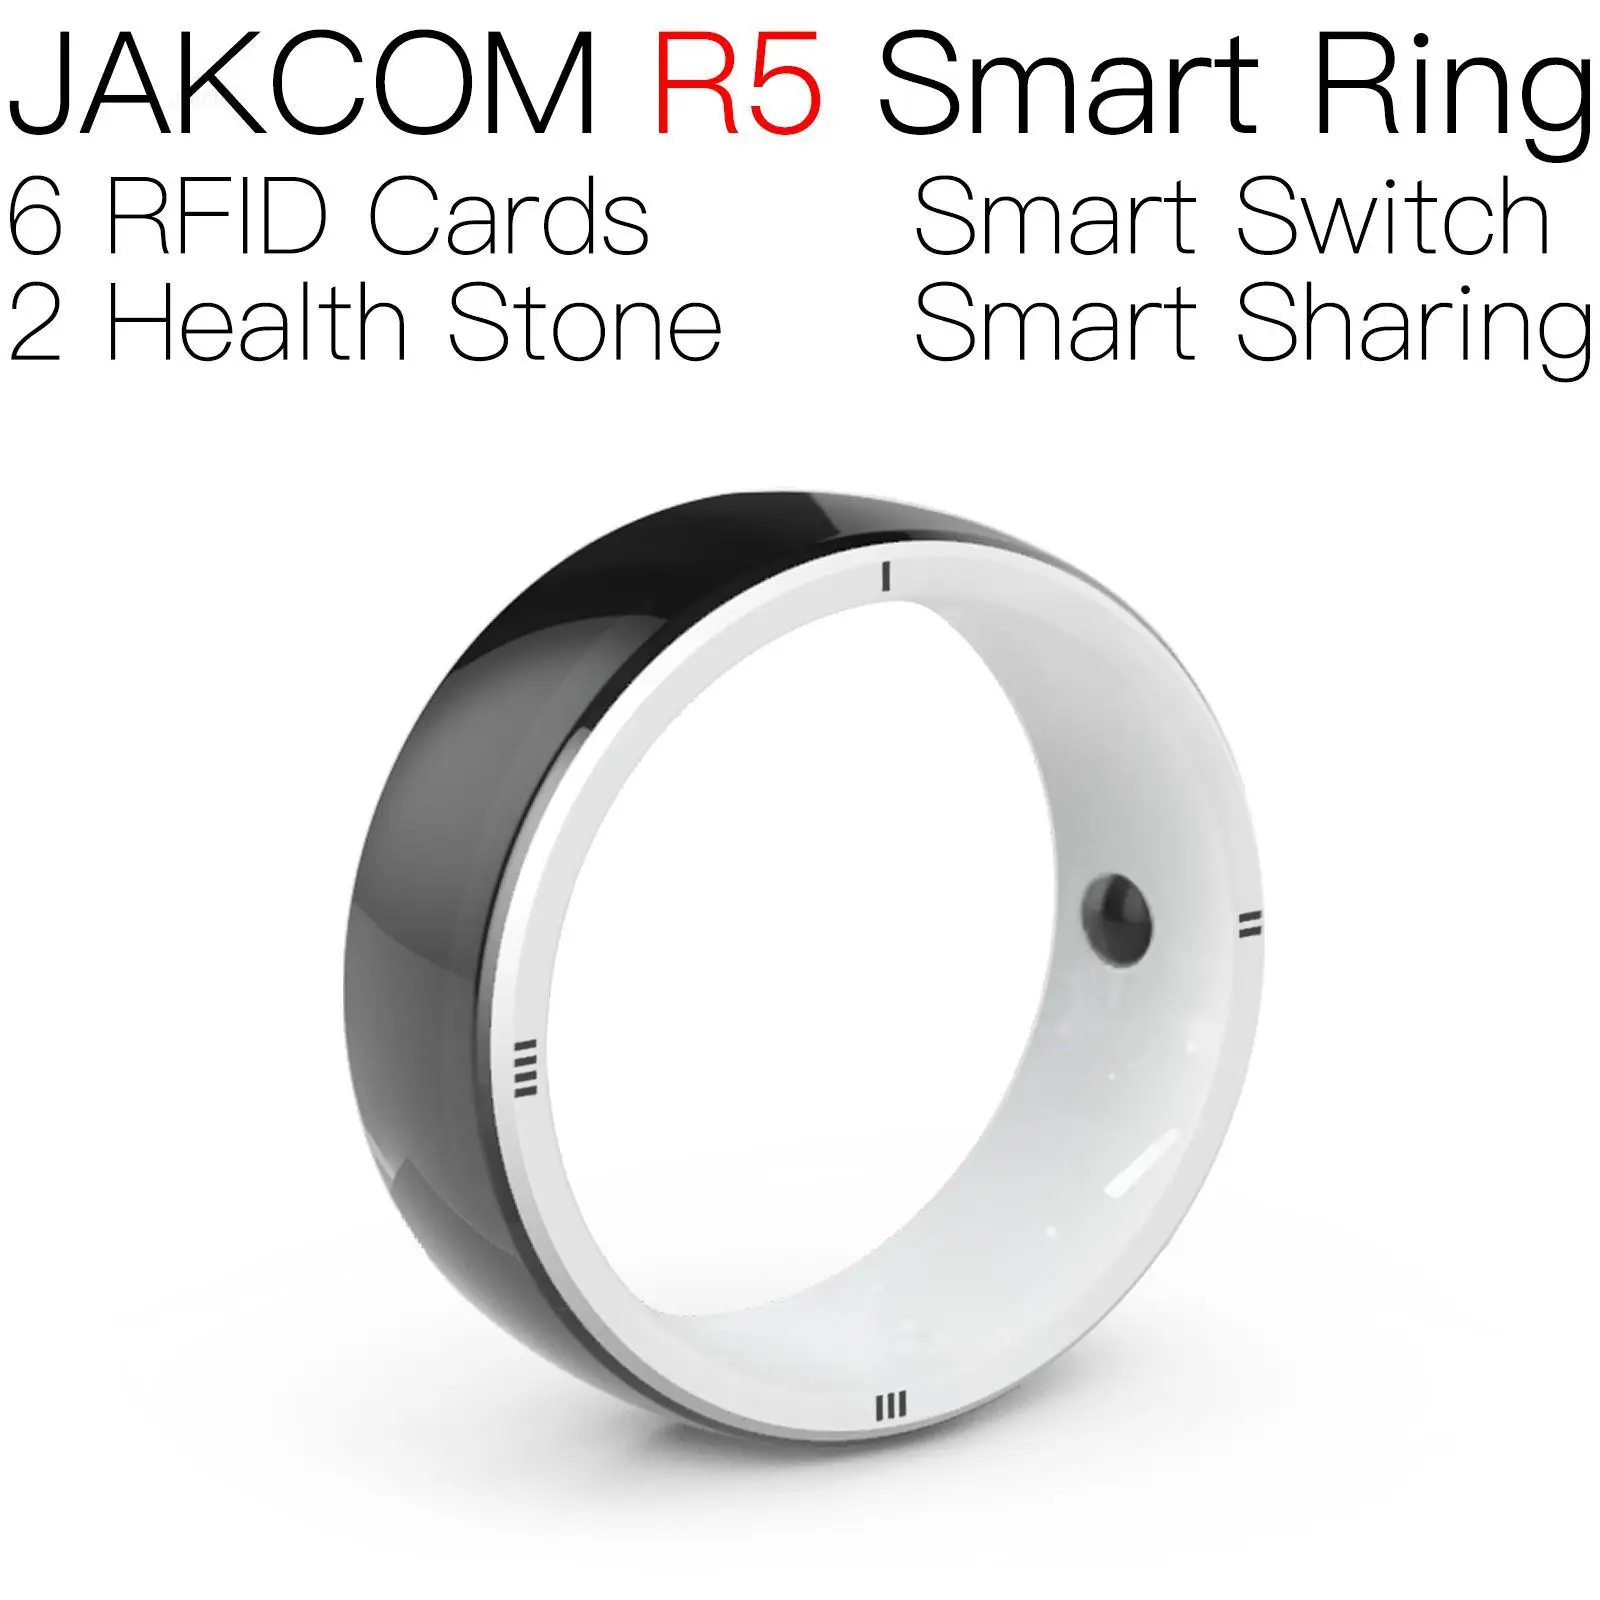 

JAKCOM R5 Smart Ring better than inserto rfid game blank card dual chip ic uid tags 125khz rewritable s50 door space invaders